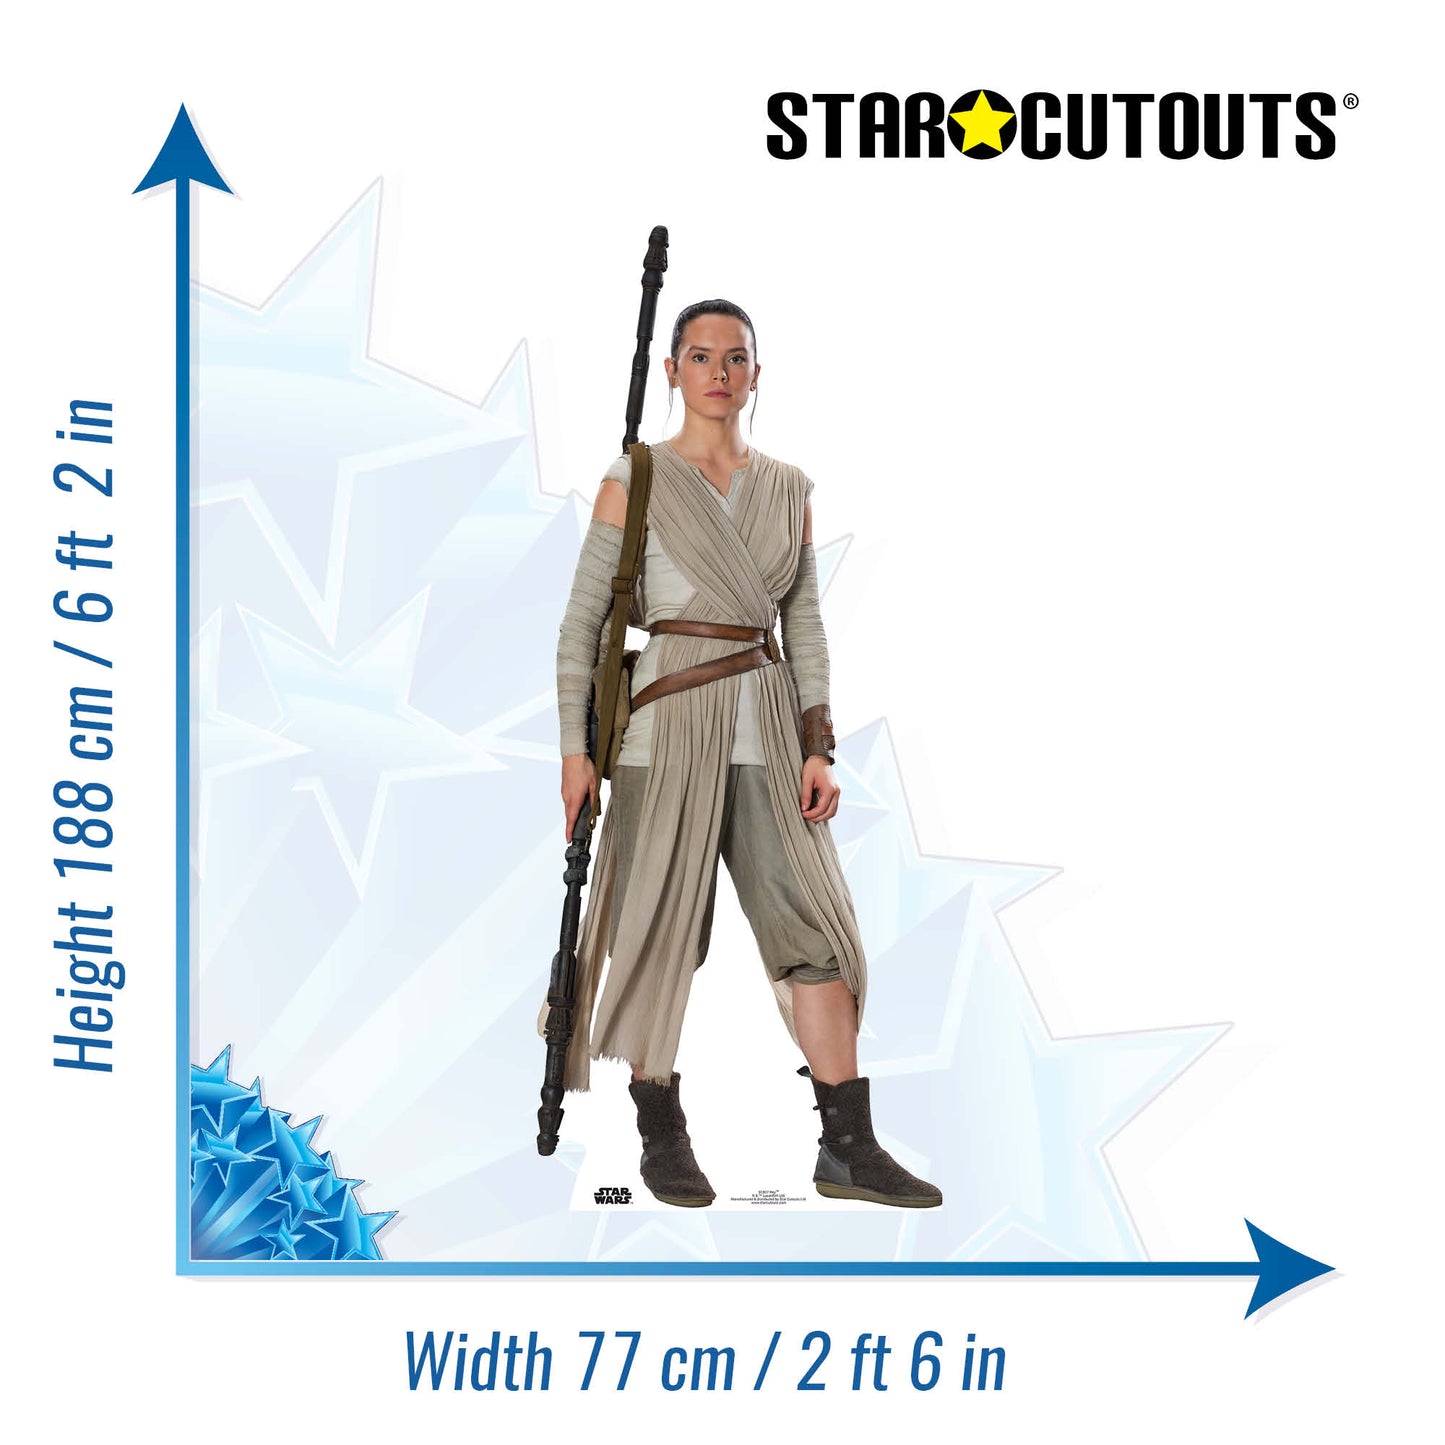 Rey Star Wars The Force Awakens Cardboard Cut Out Height 188cm